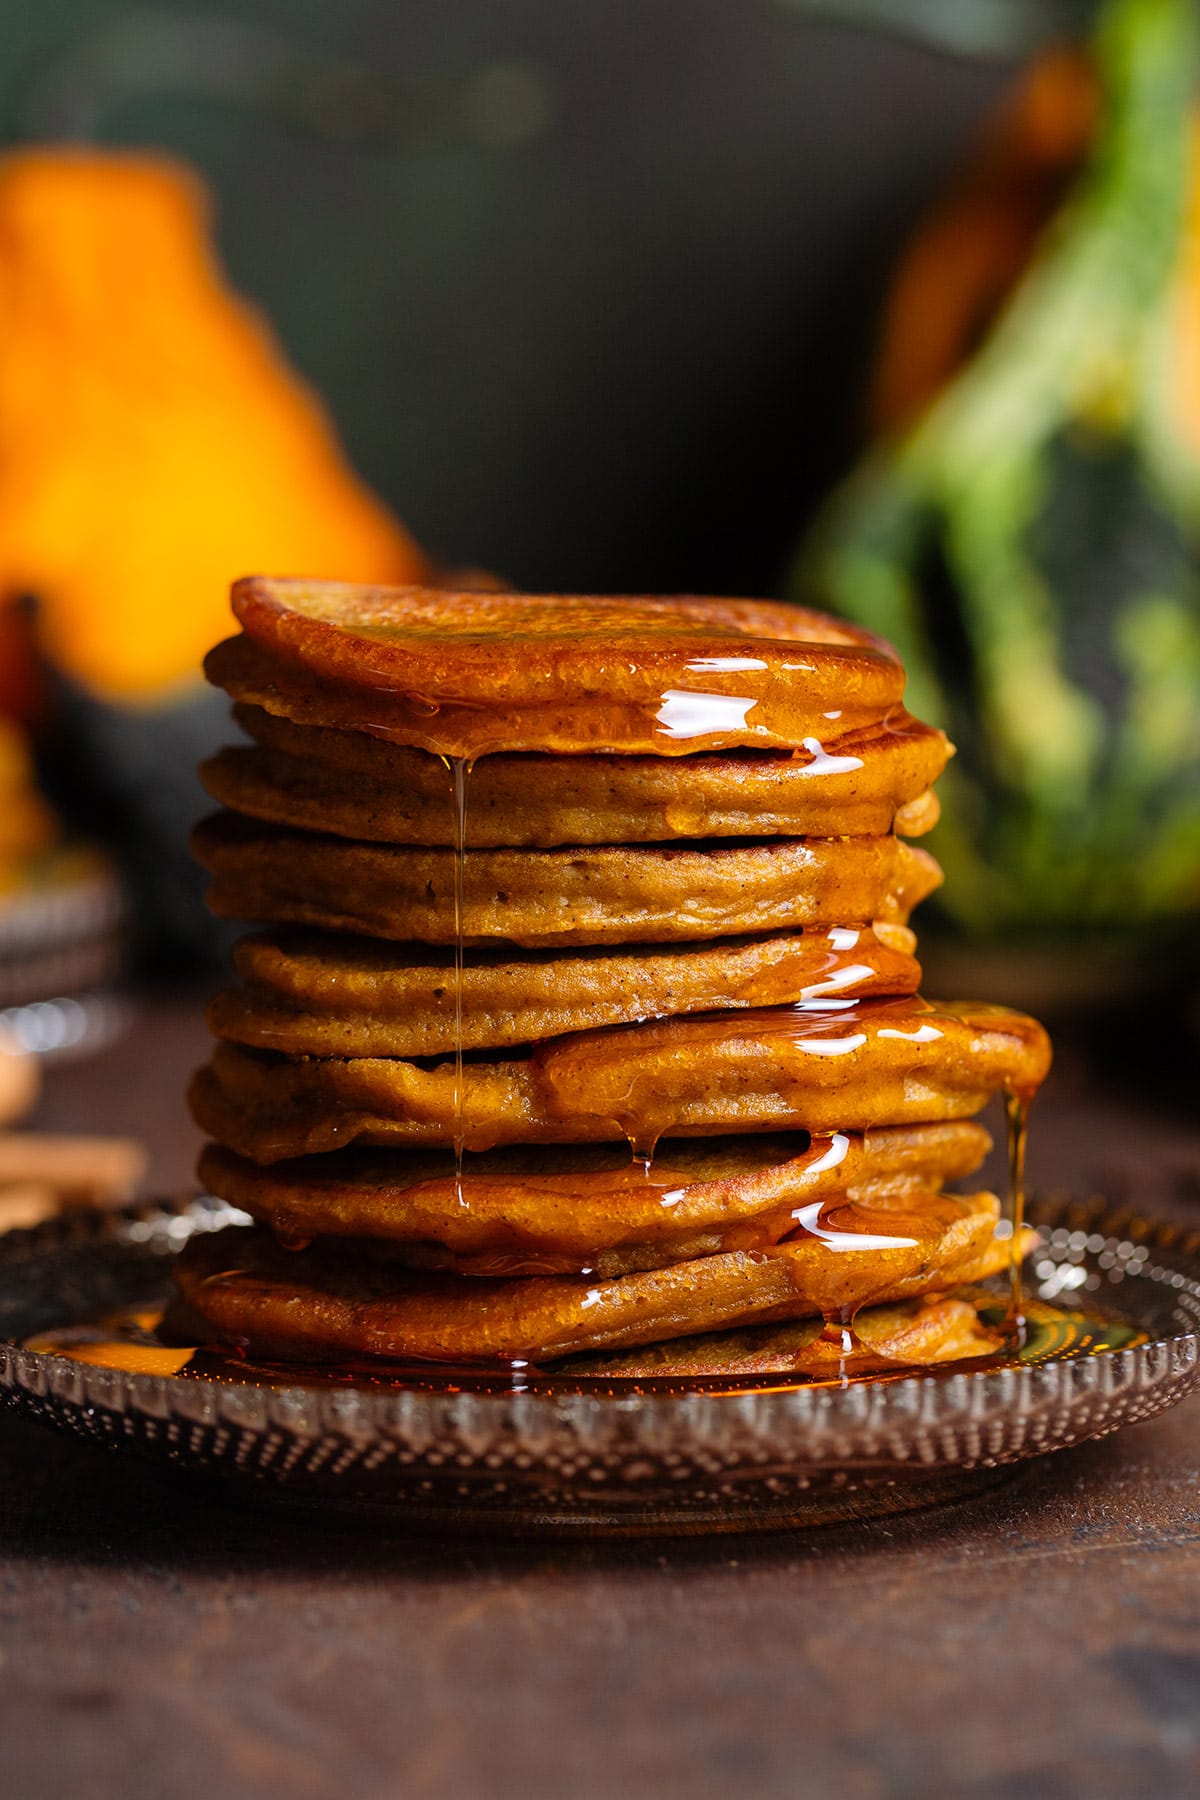 Pumpkin pancakes stacked on a brown glass plate with maple syrup dripping down the sides, with various pumpkins in the background.